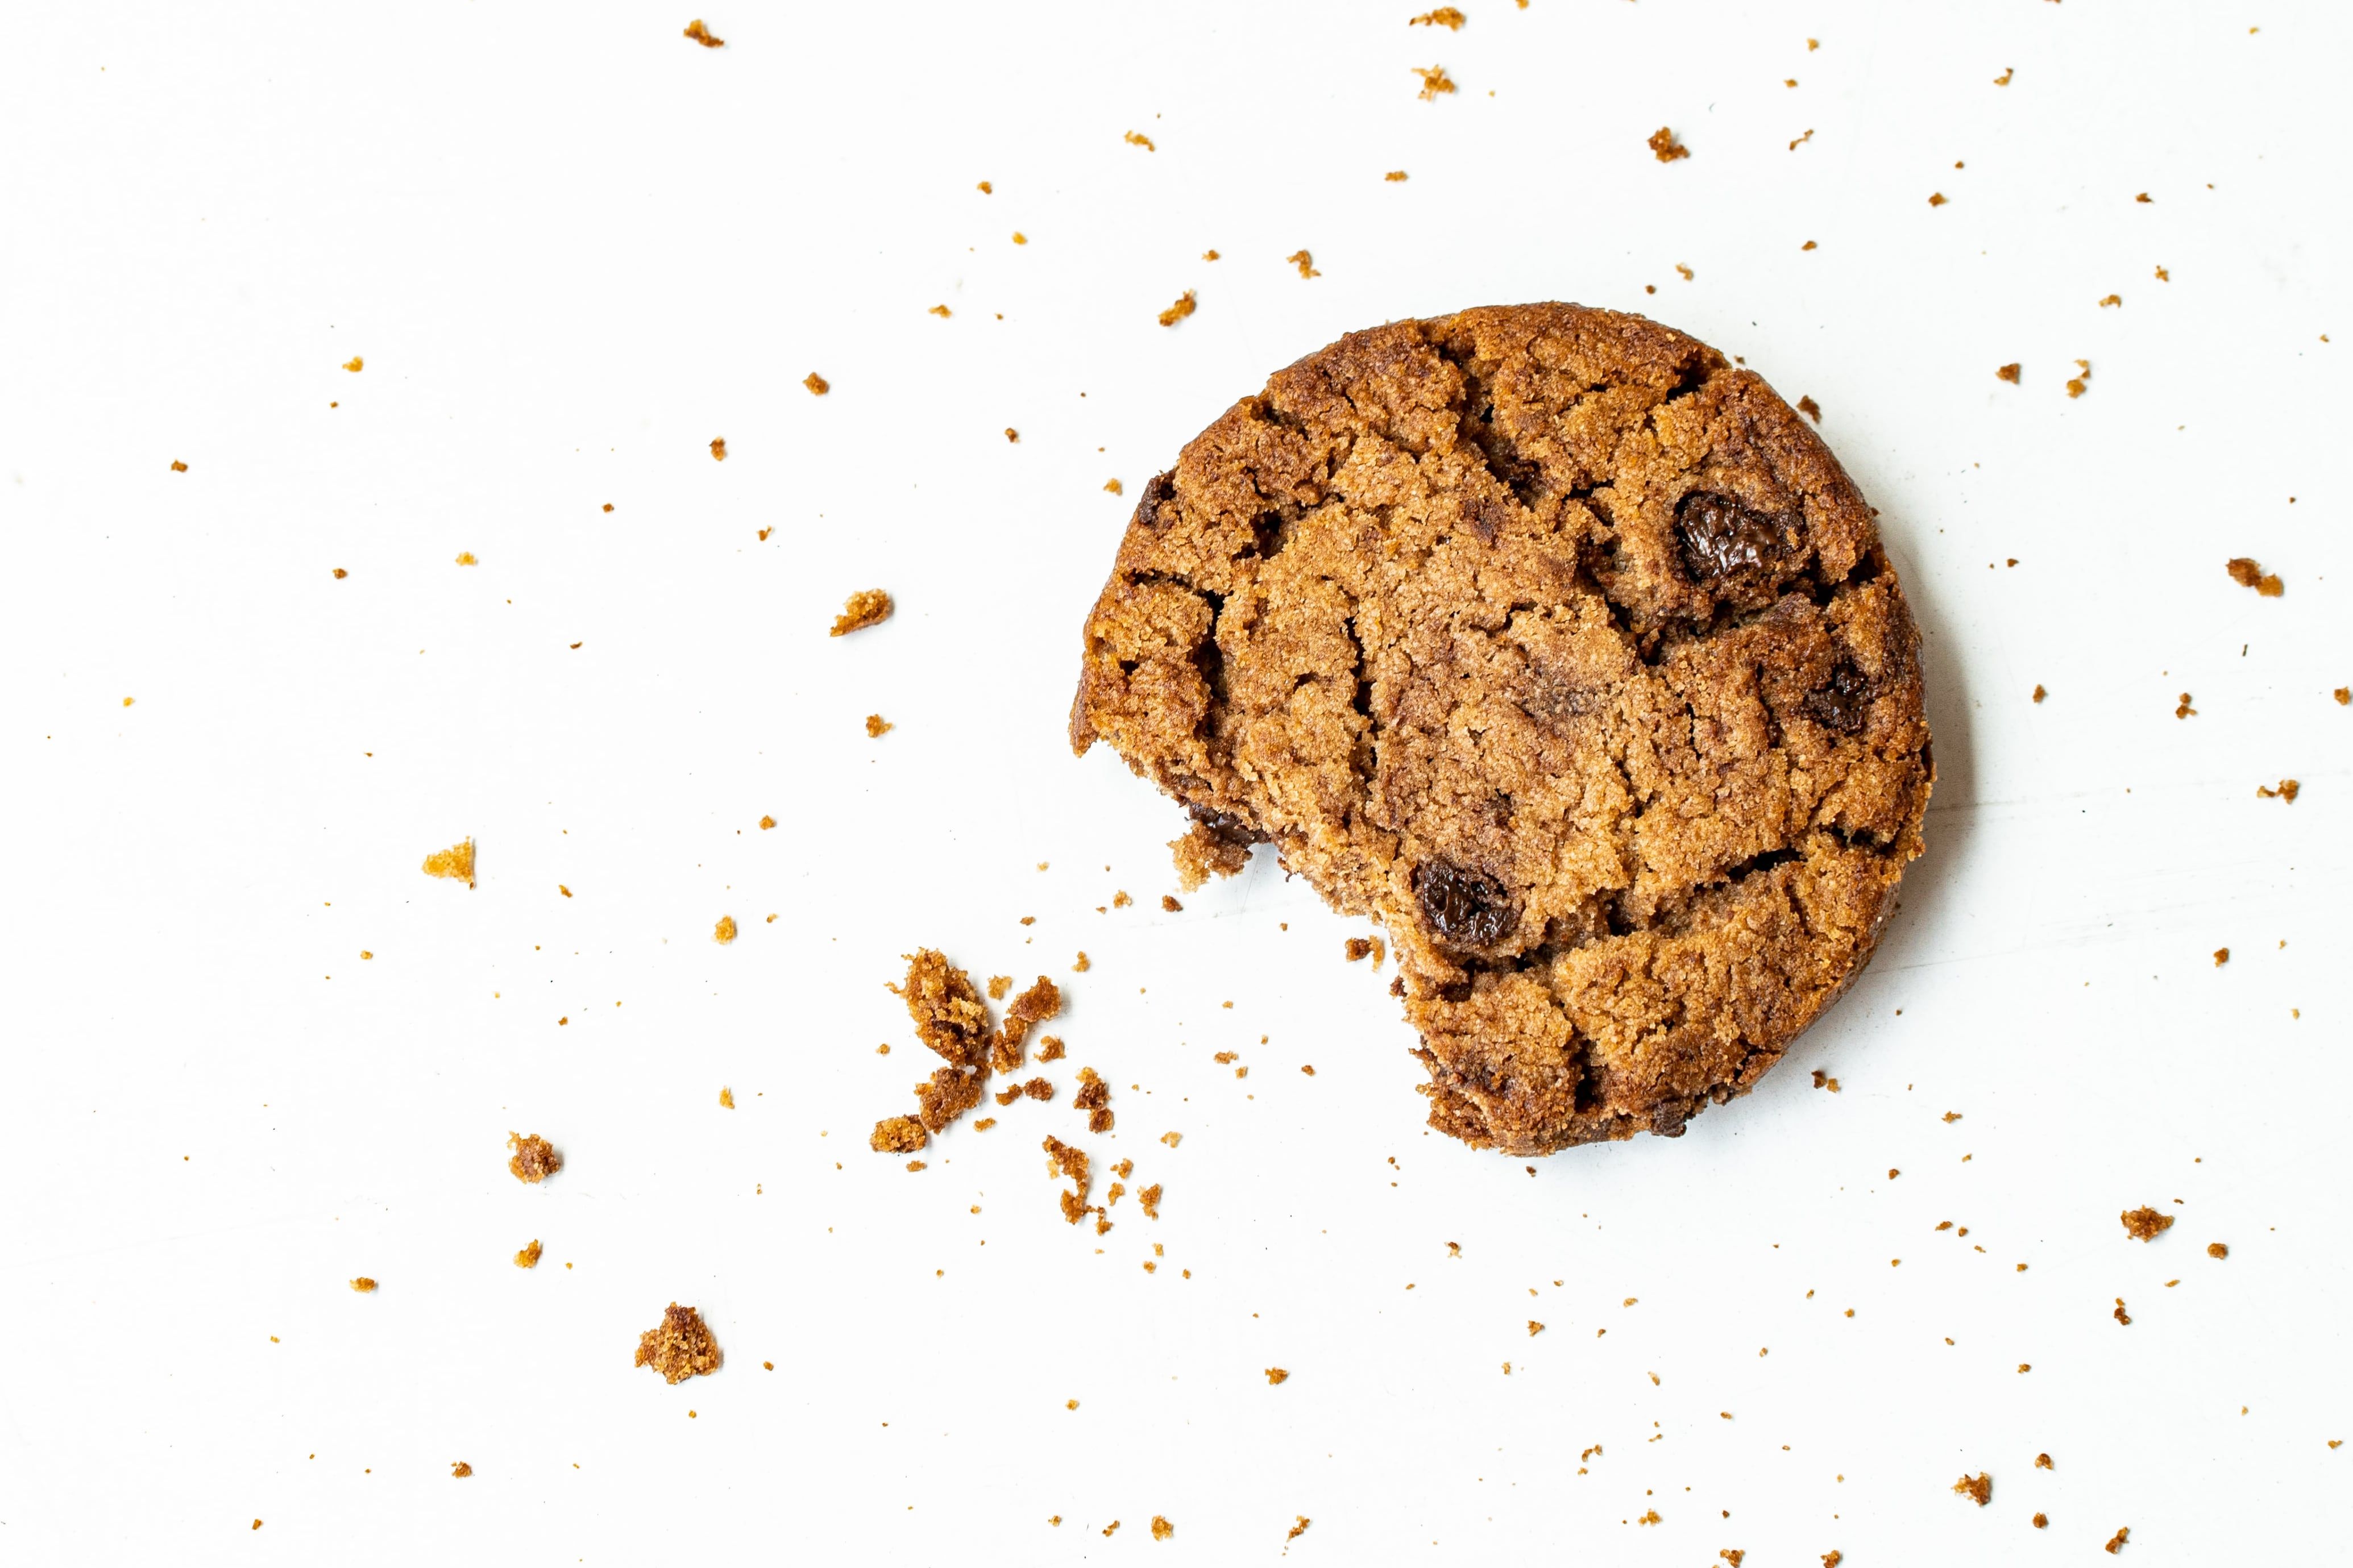 A cookie with a bite taken out and crumbs against a white background.